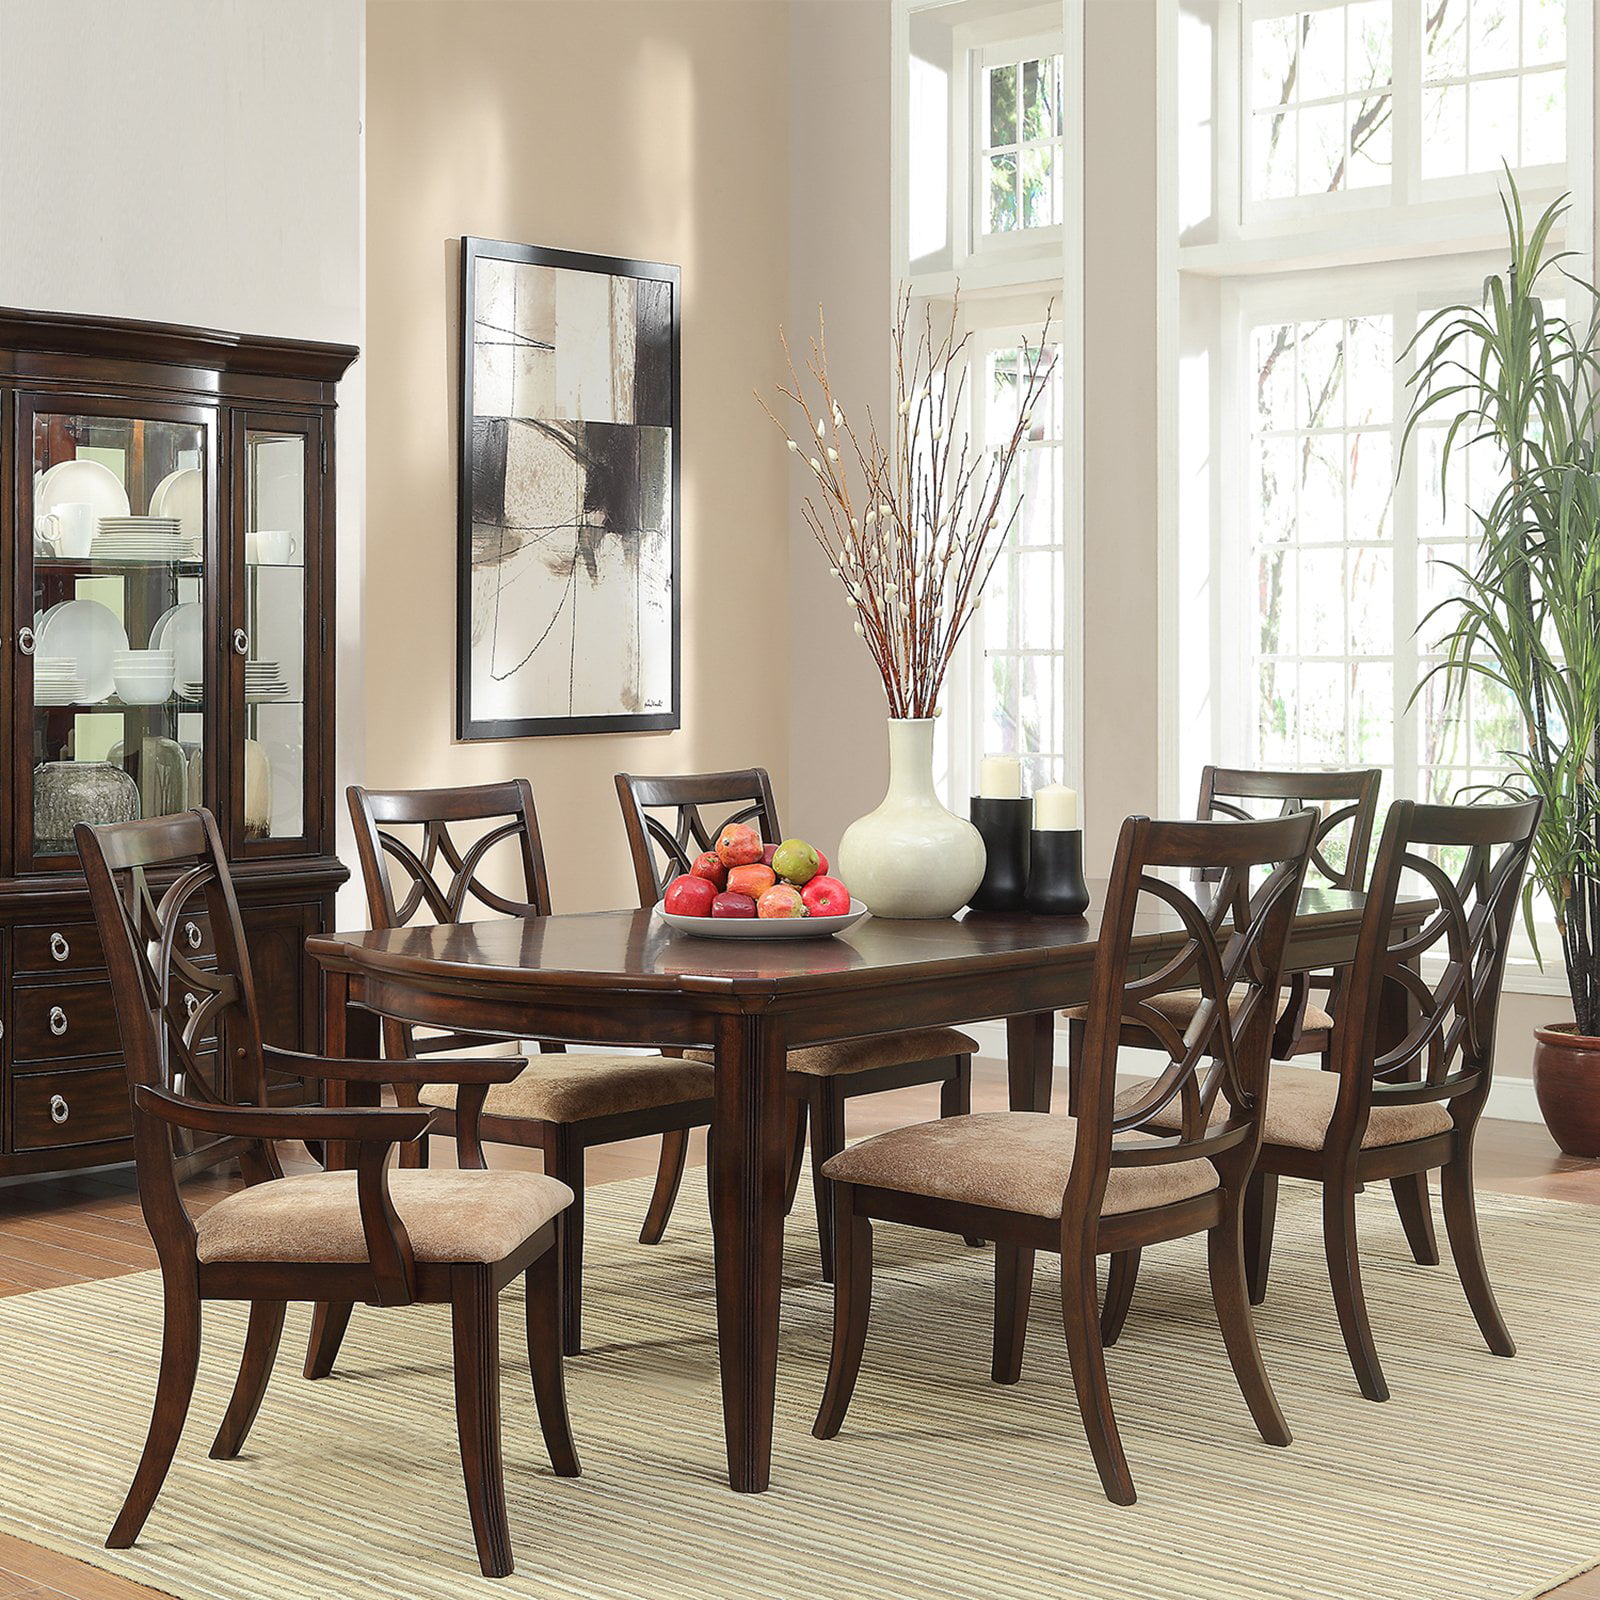 7 Piece Expandable Dining Table Set, Keegan Espresso Finish Contemporary Dining Room Furniture Set